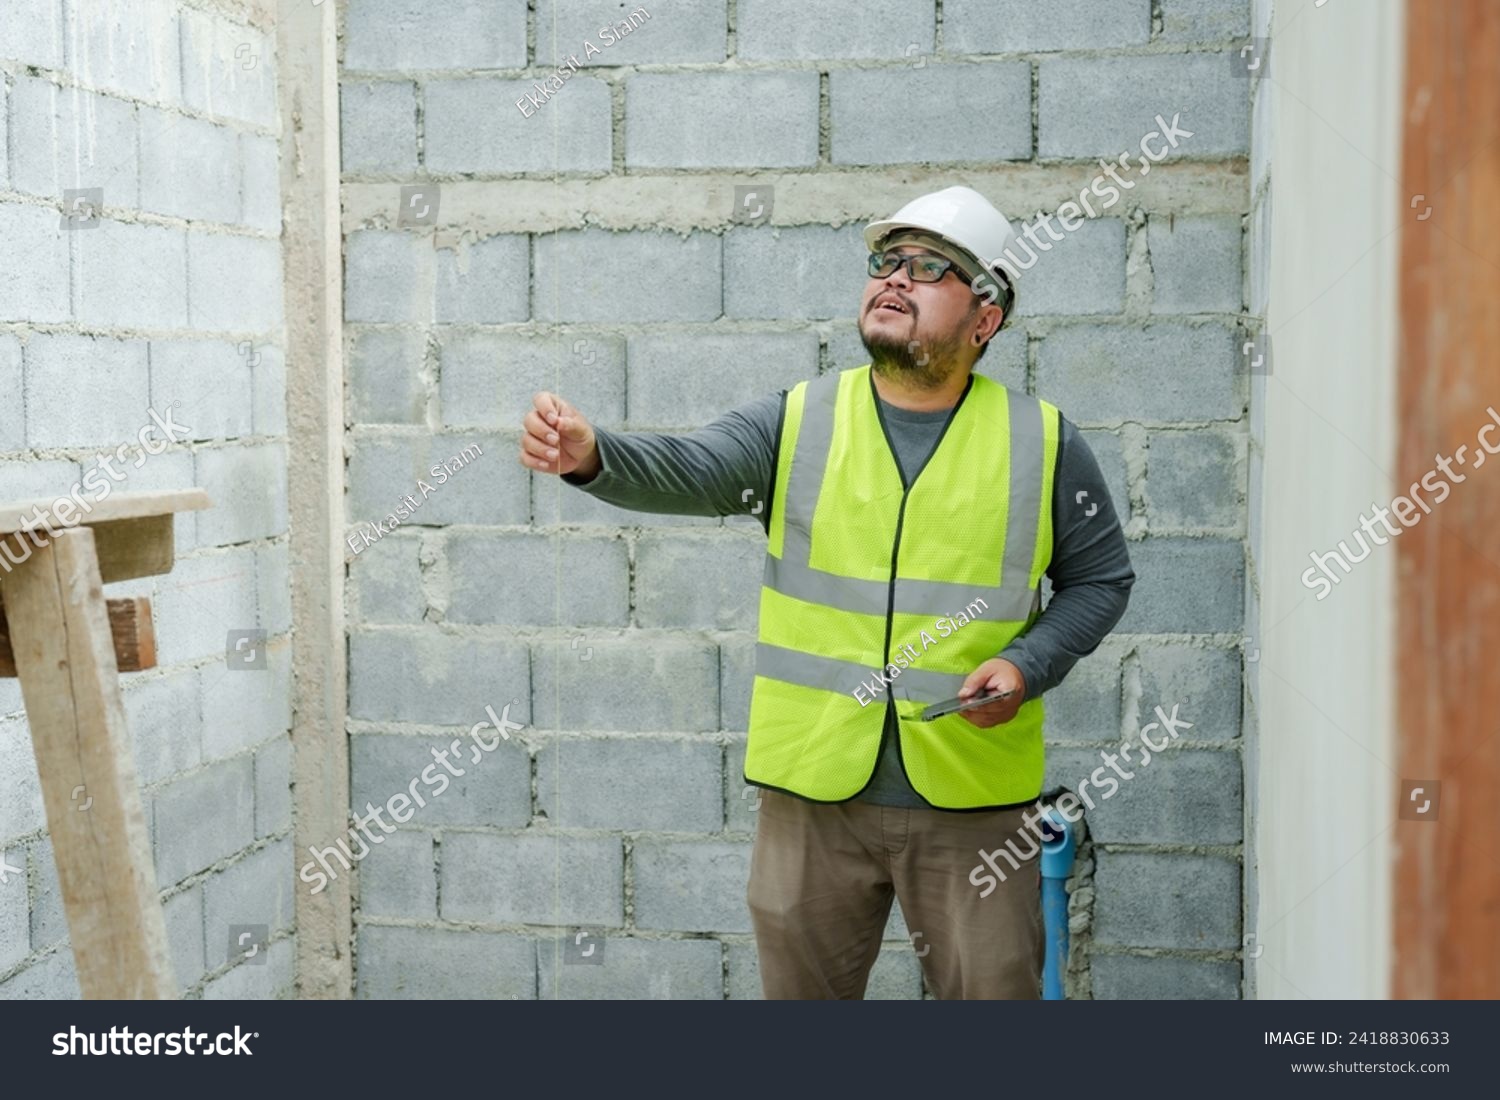 Asian male construction engineer, wearing full clothing, safety helmet, reflective vest, holding laptop in hand, checking work site for completeness, following construction plans. #2418830633